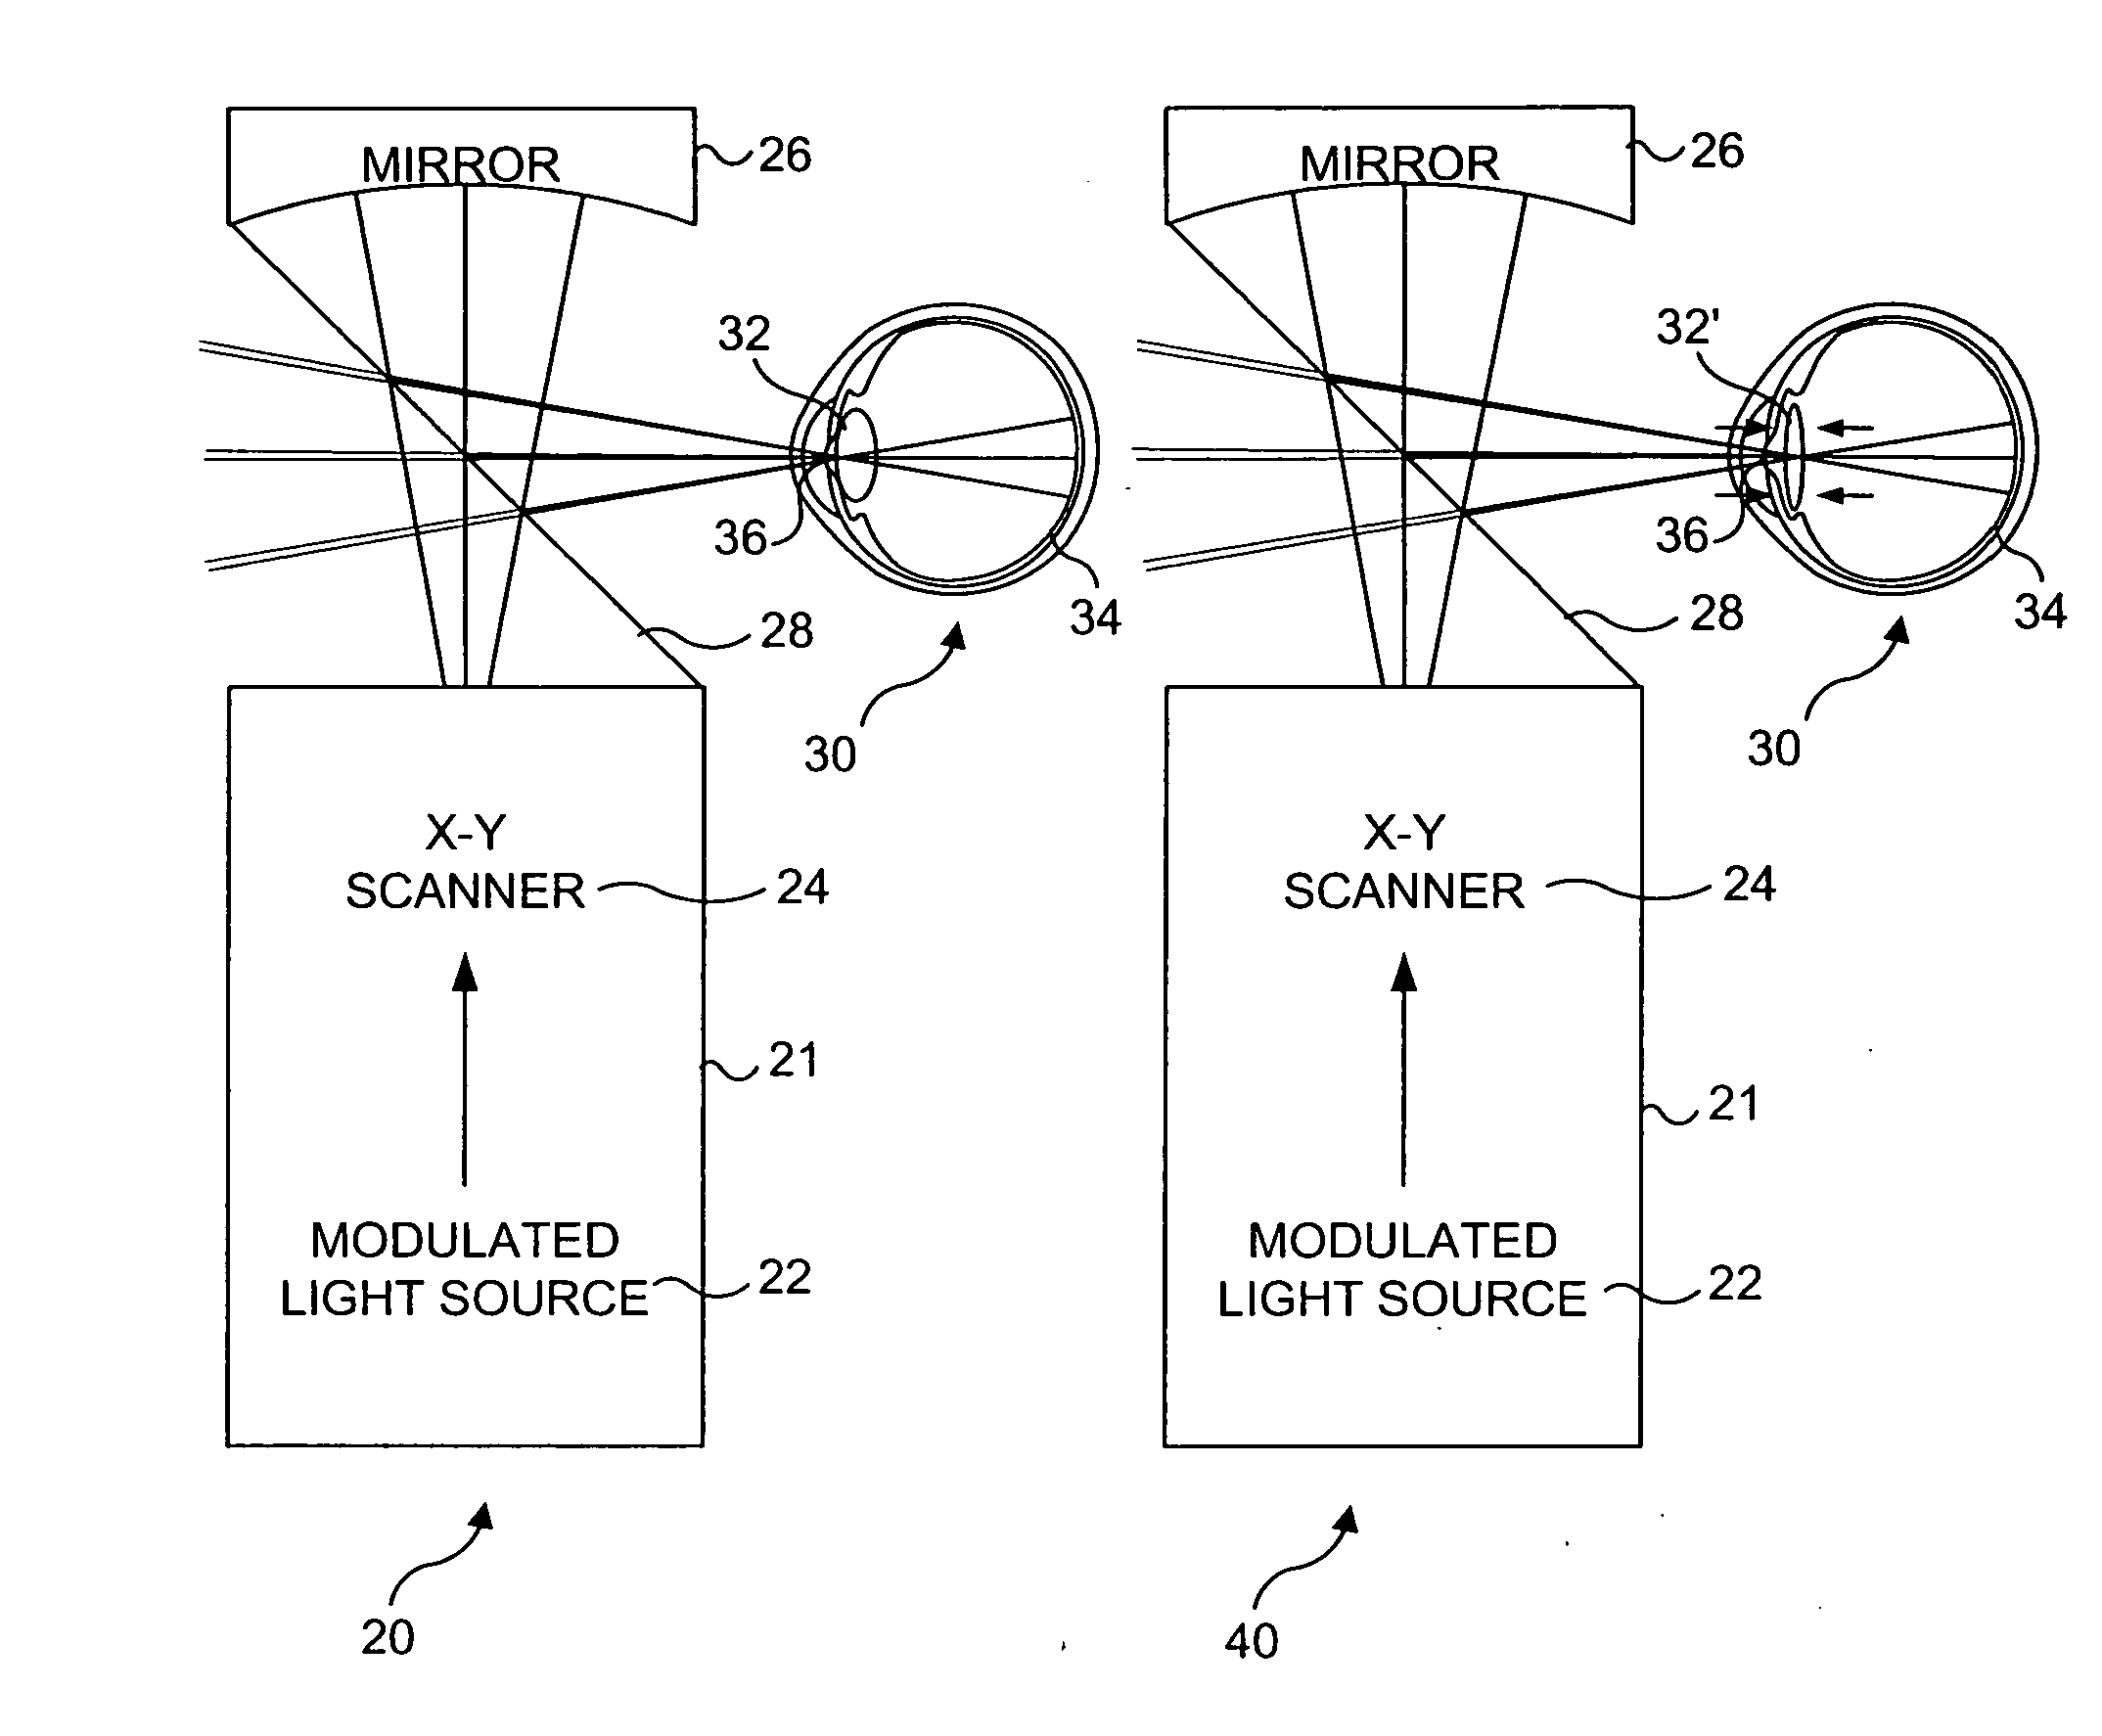 Materials and methods for simulating focal shifts in viewers using large depth of focus displays